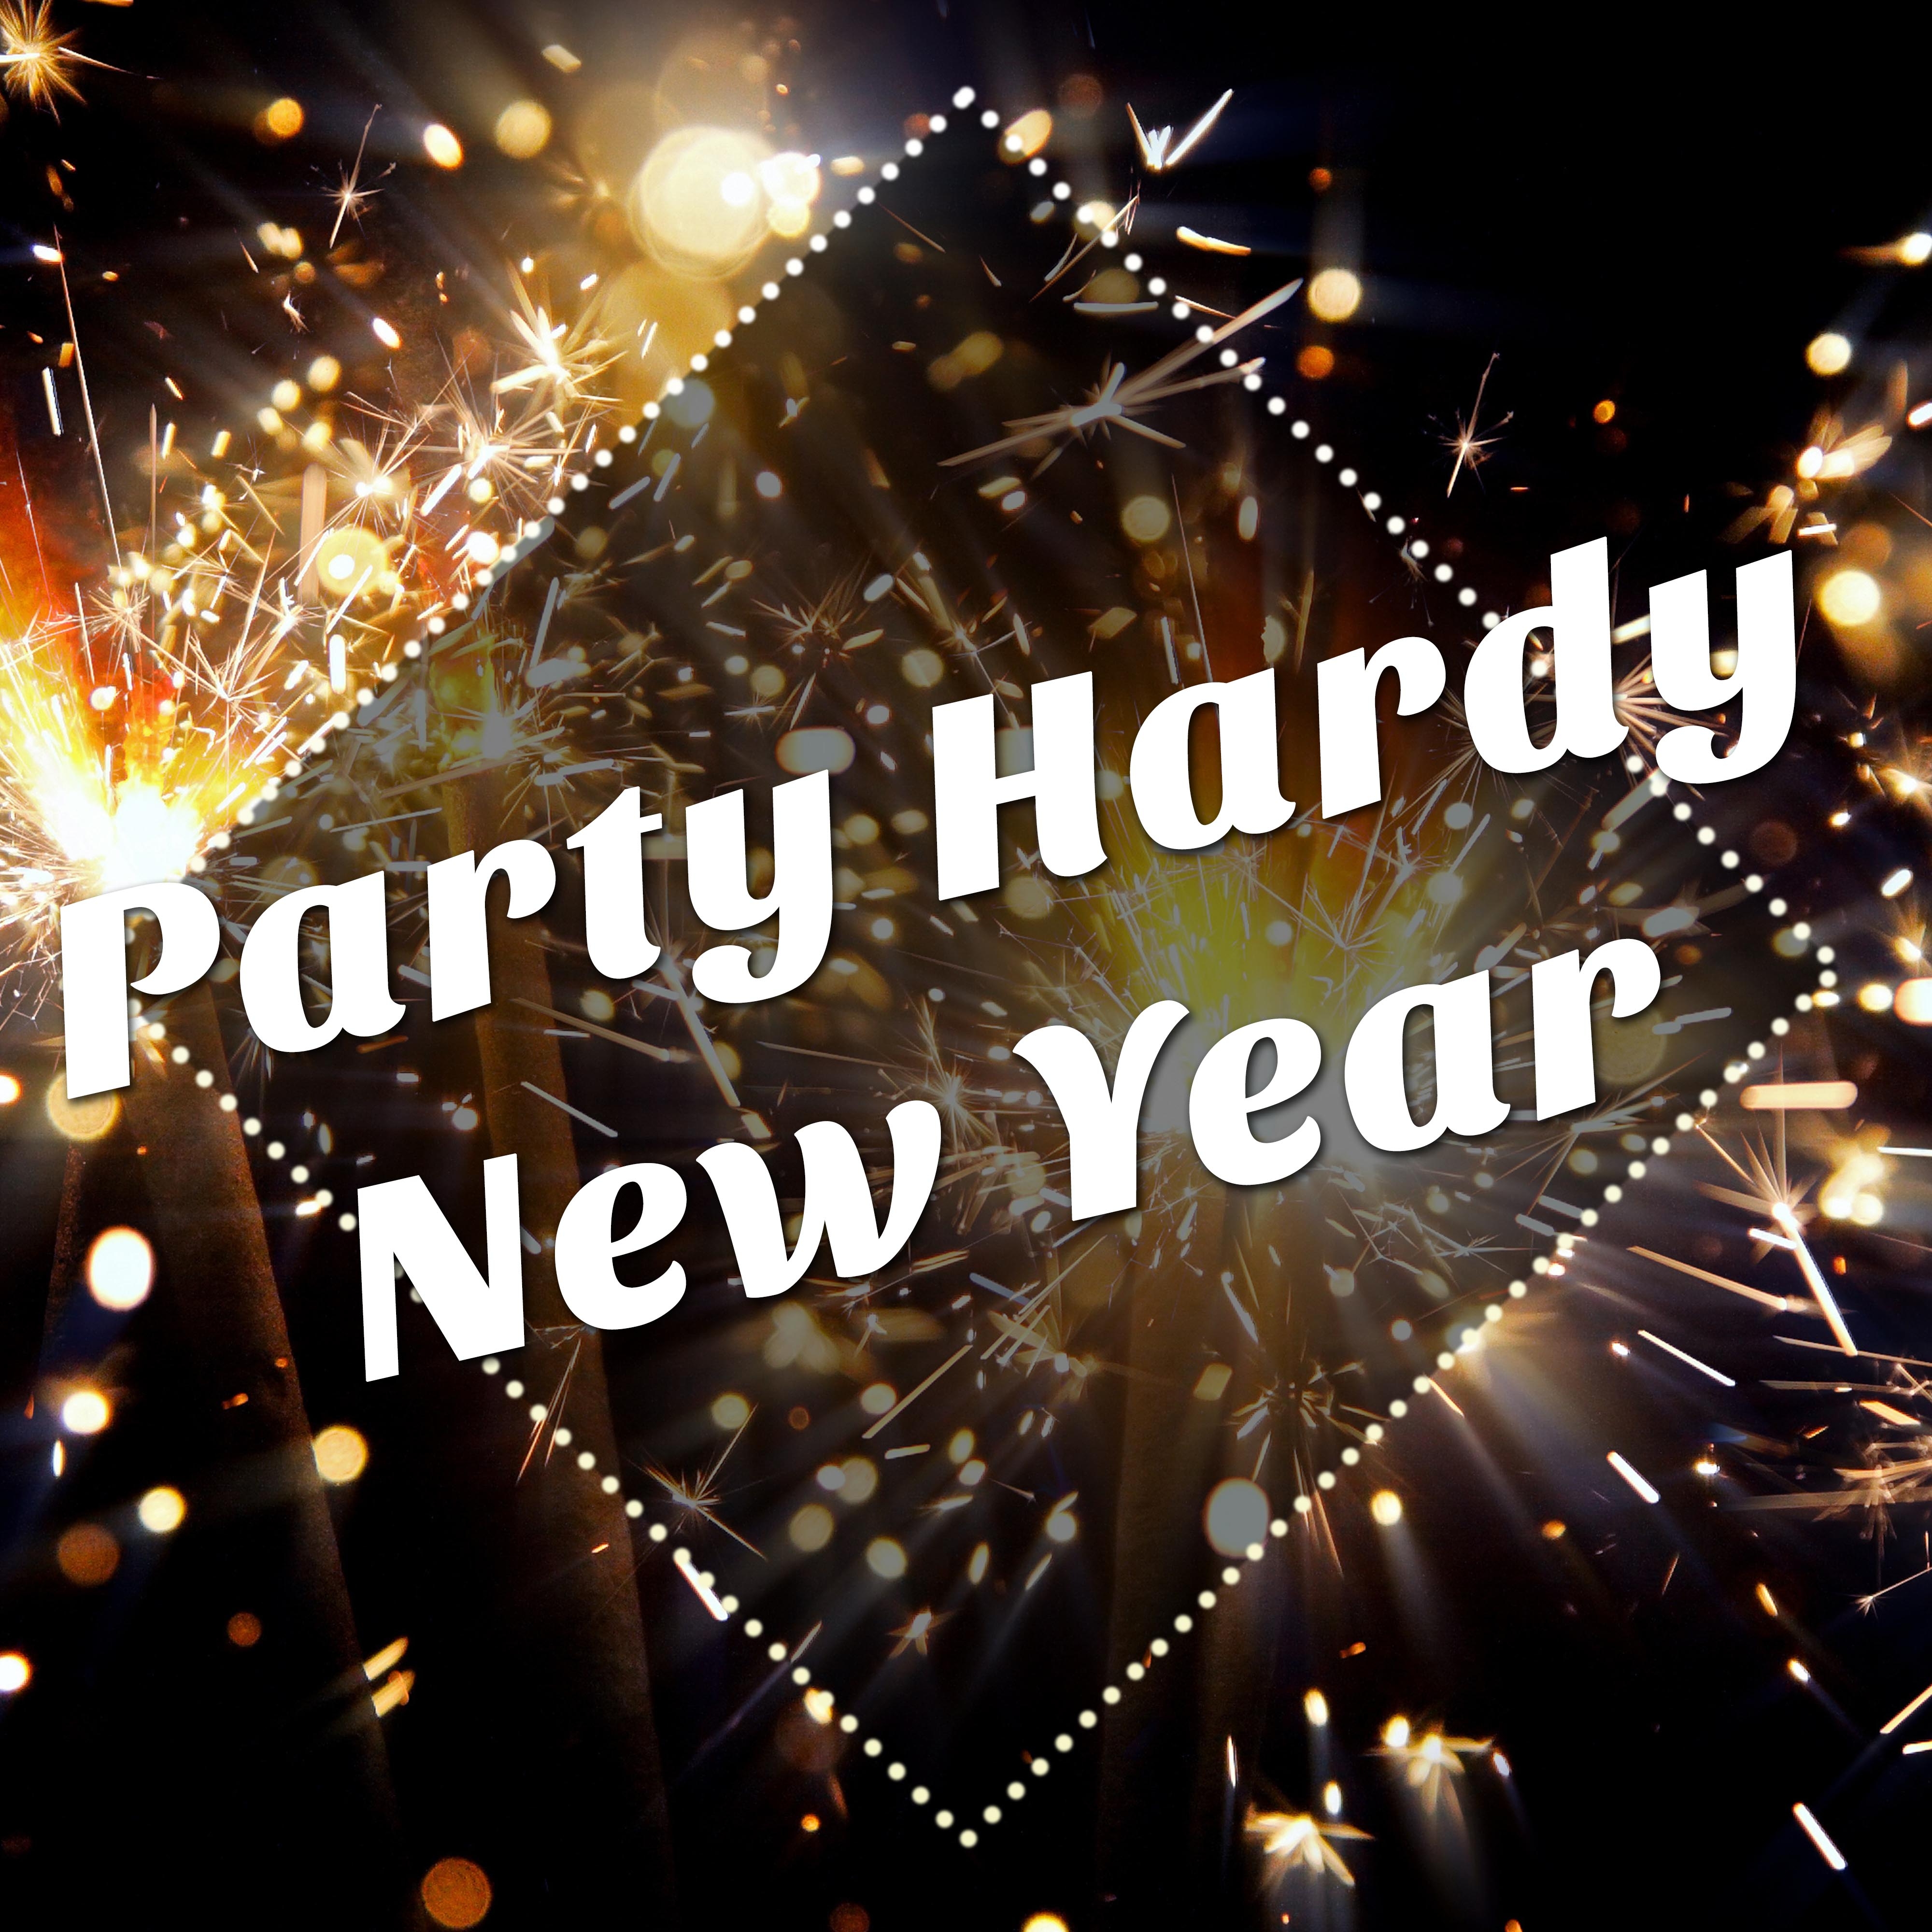 Party Hardy New Year - Turning Down the Lights and Party with these Tropical House Latin Songs for New Year’s Eve Celebrations